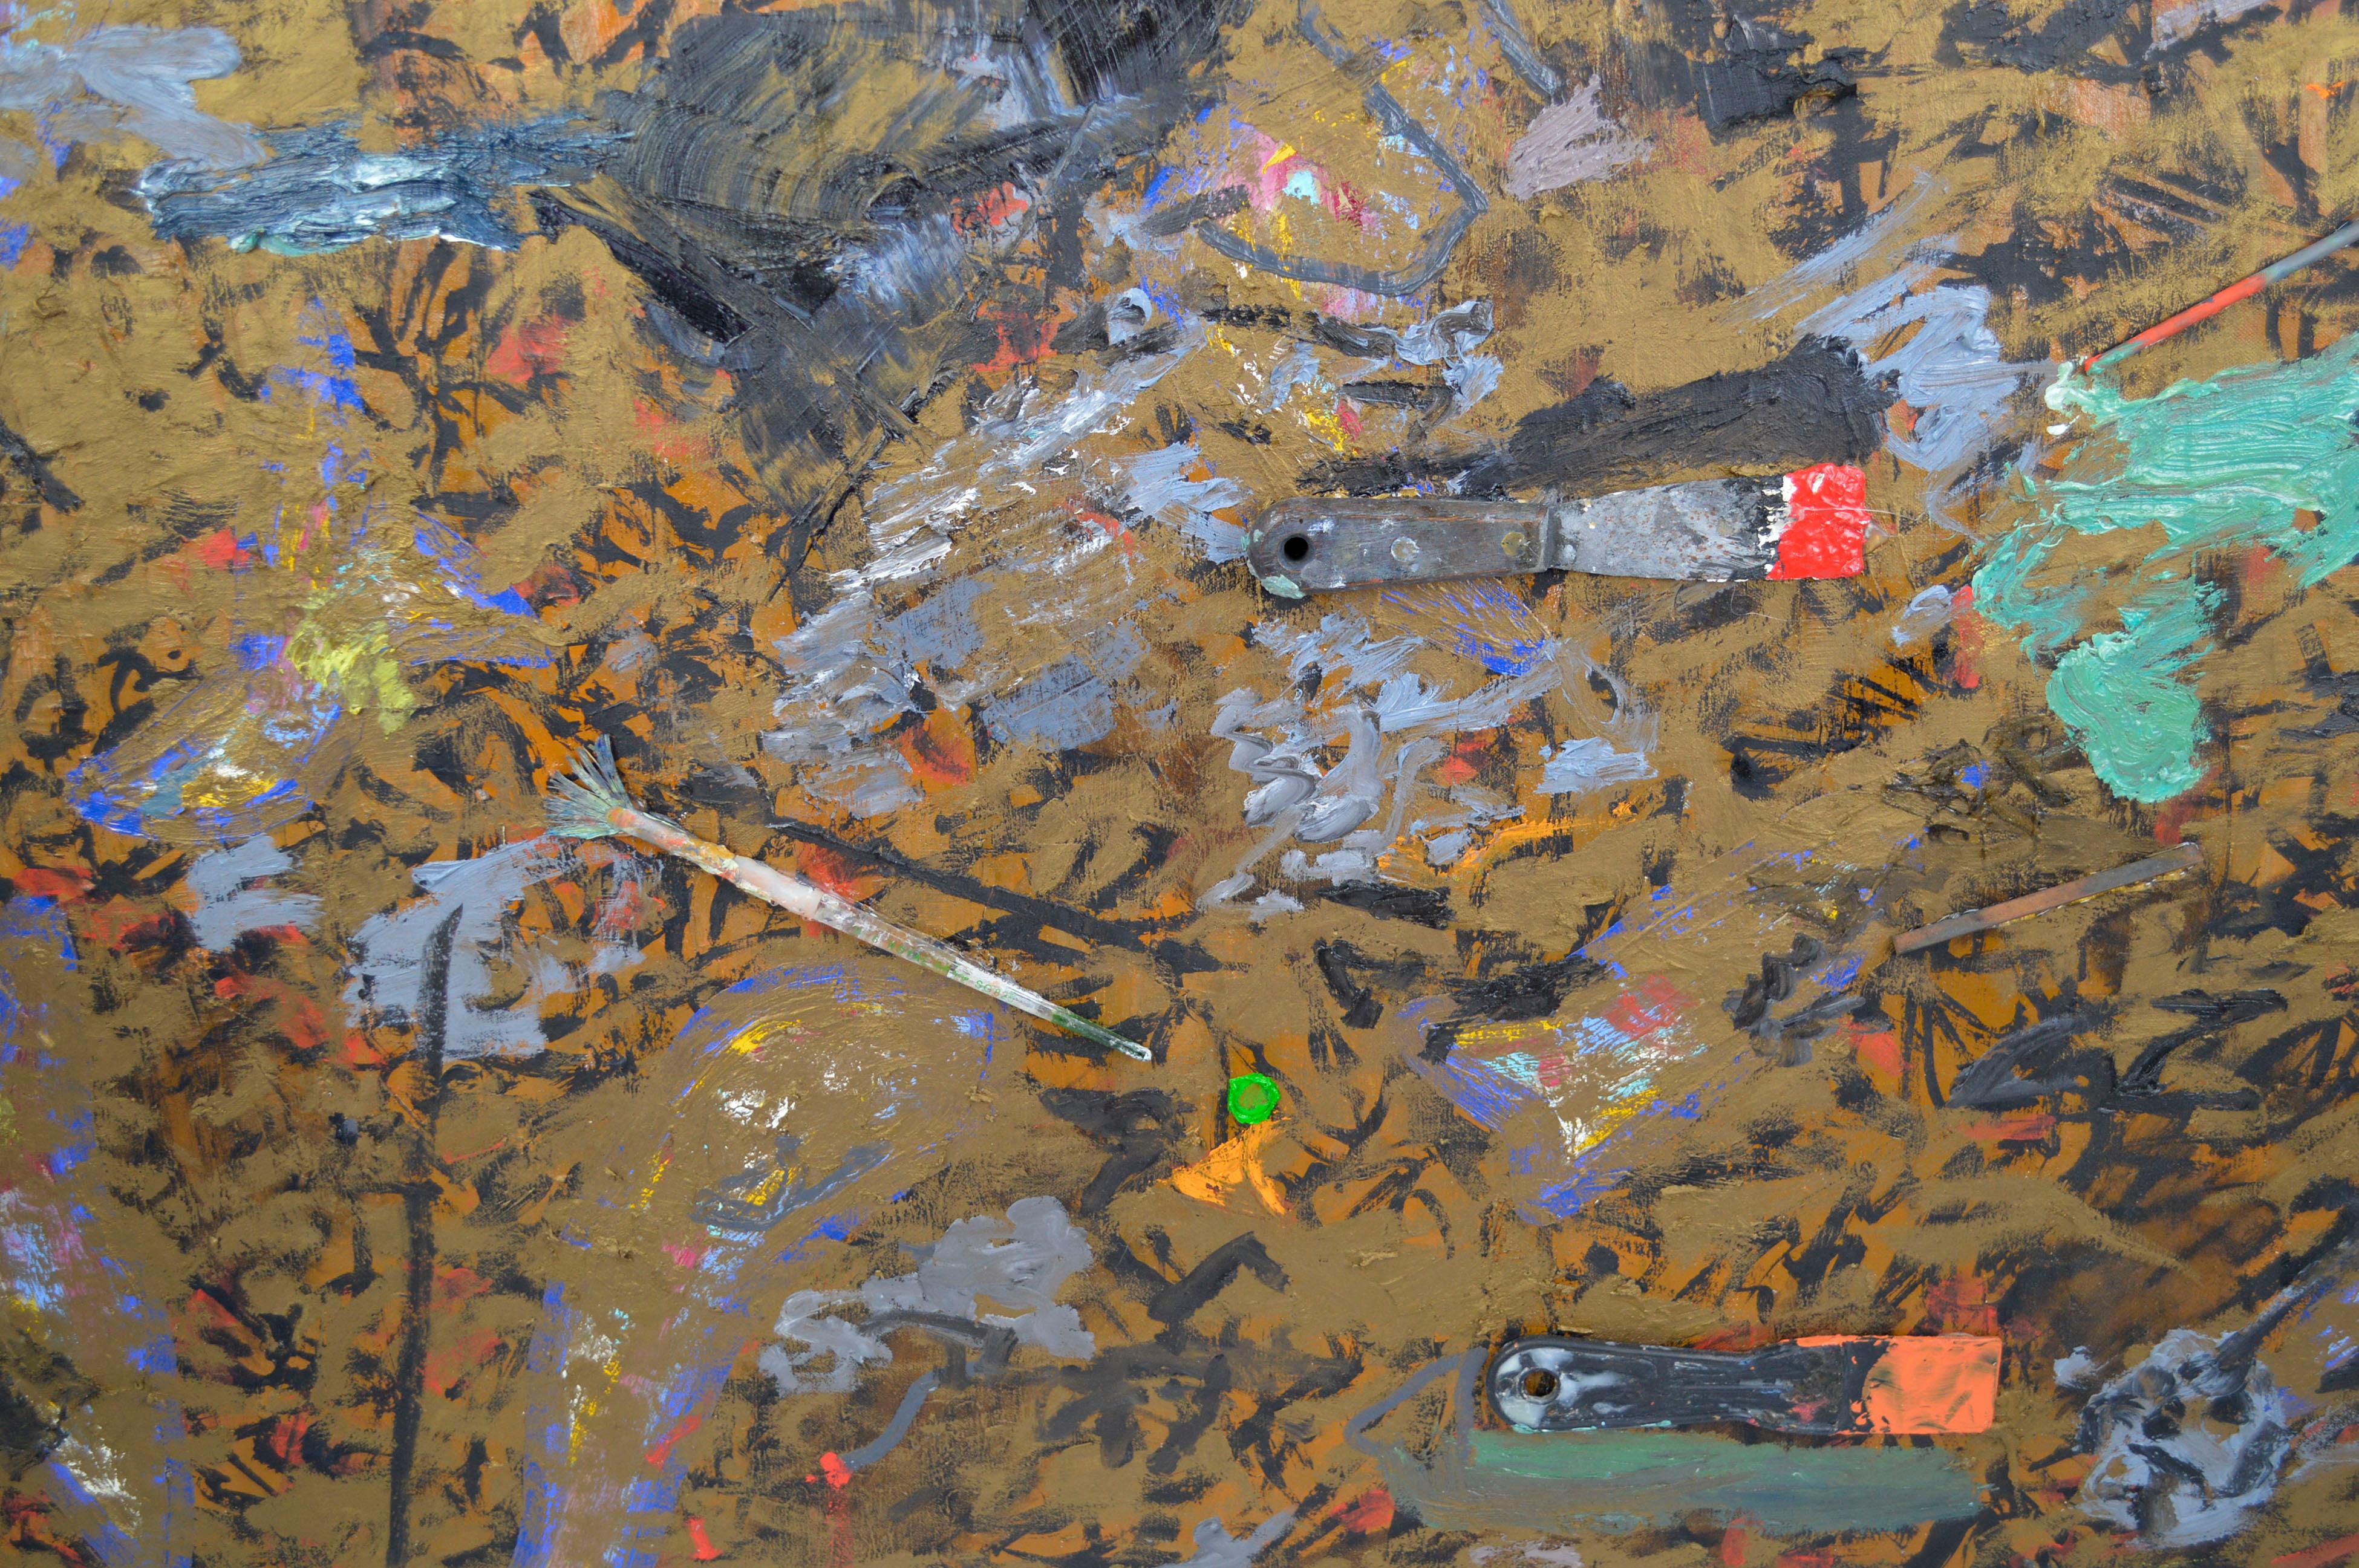 Contemporary large-scale abstract assemblage oil painting with various paint brushes, paint tube, and other found objects affixed to the surface of the canvas with a brown and black background by Bay Area artist Michael Pauker (American, b.1957).